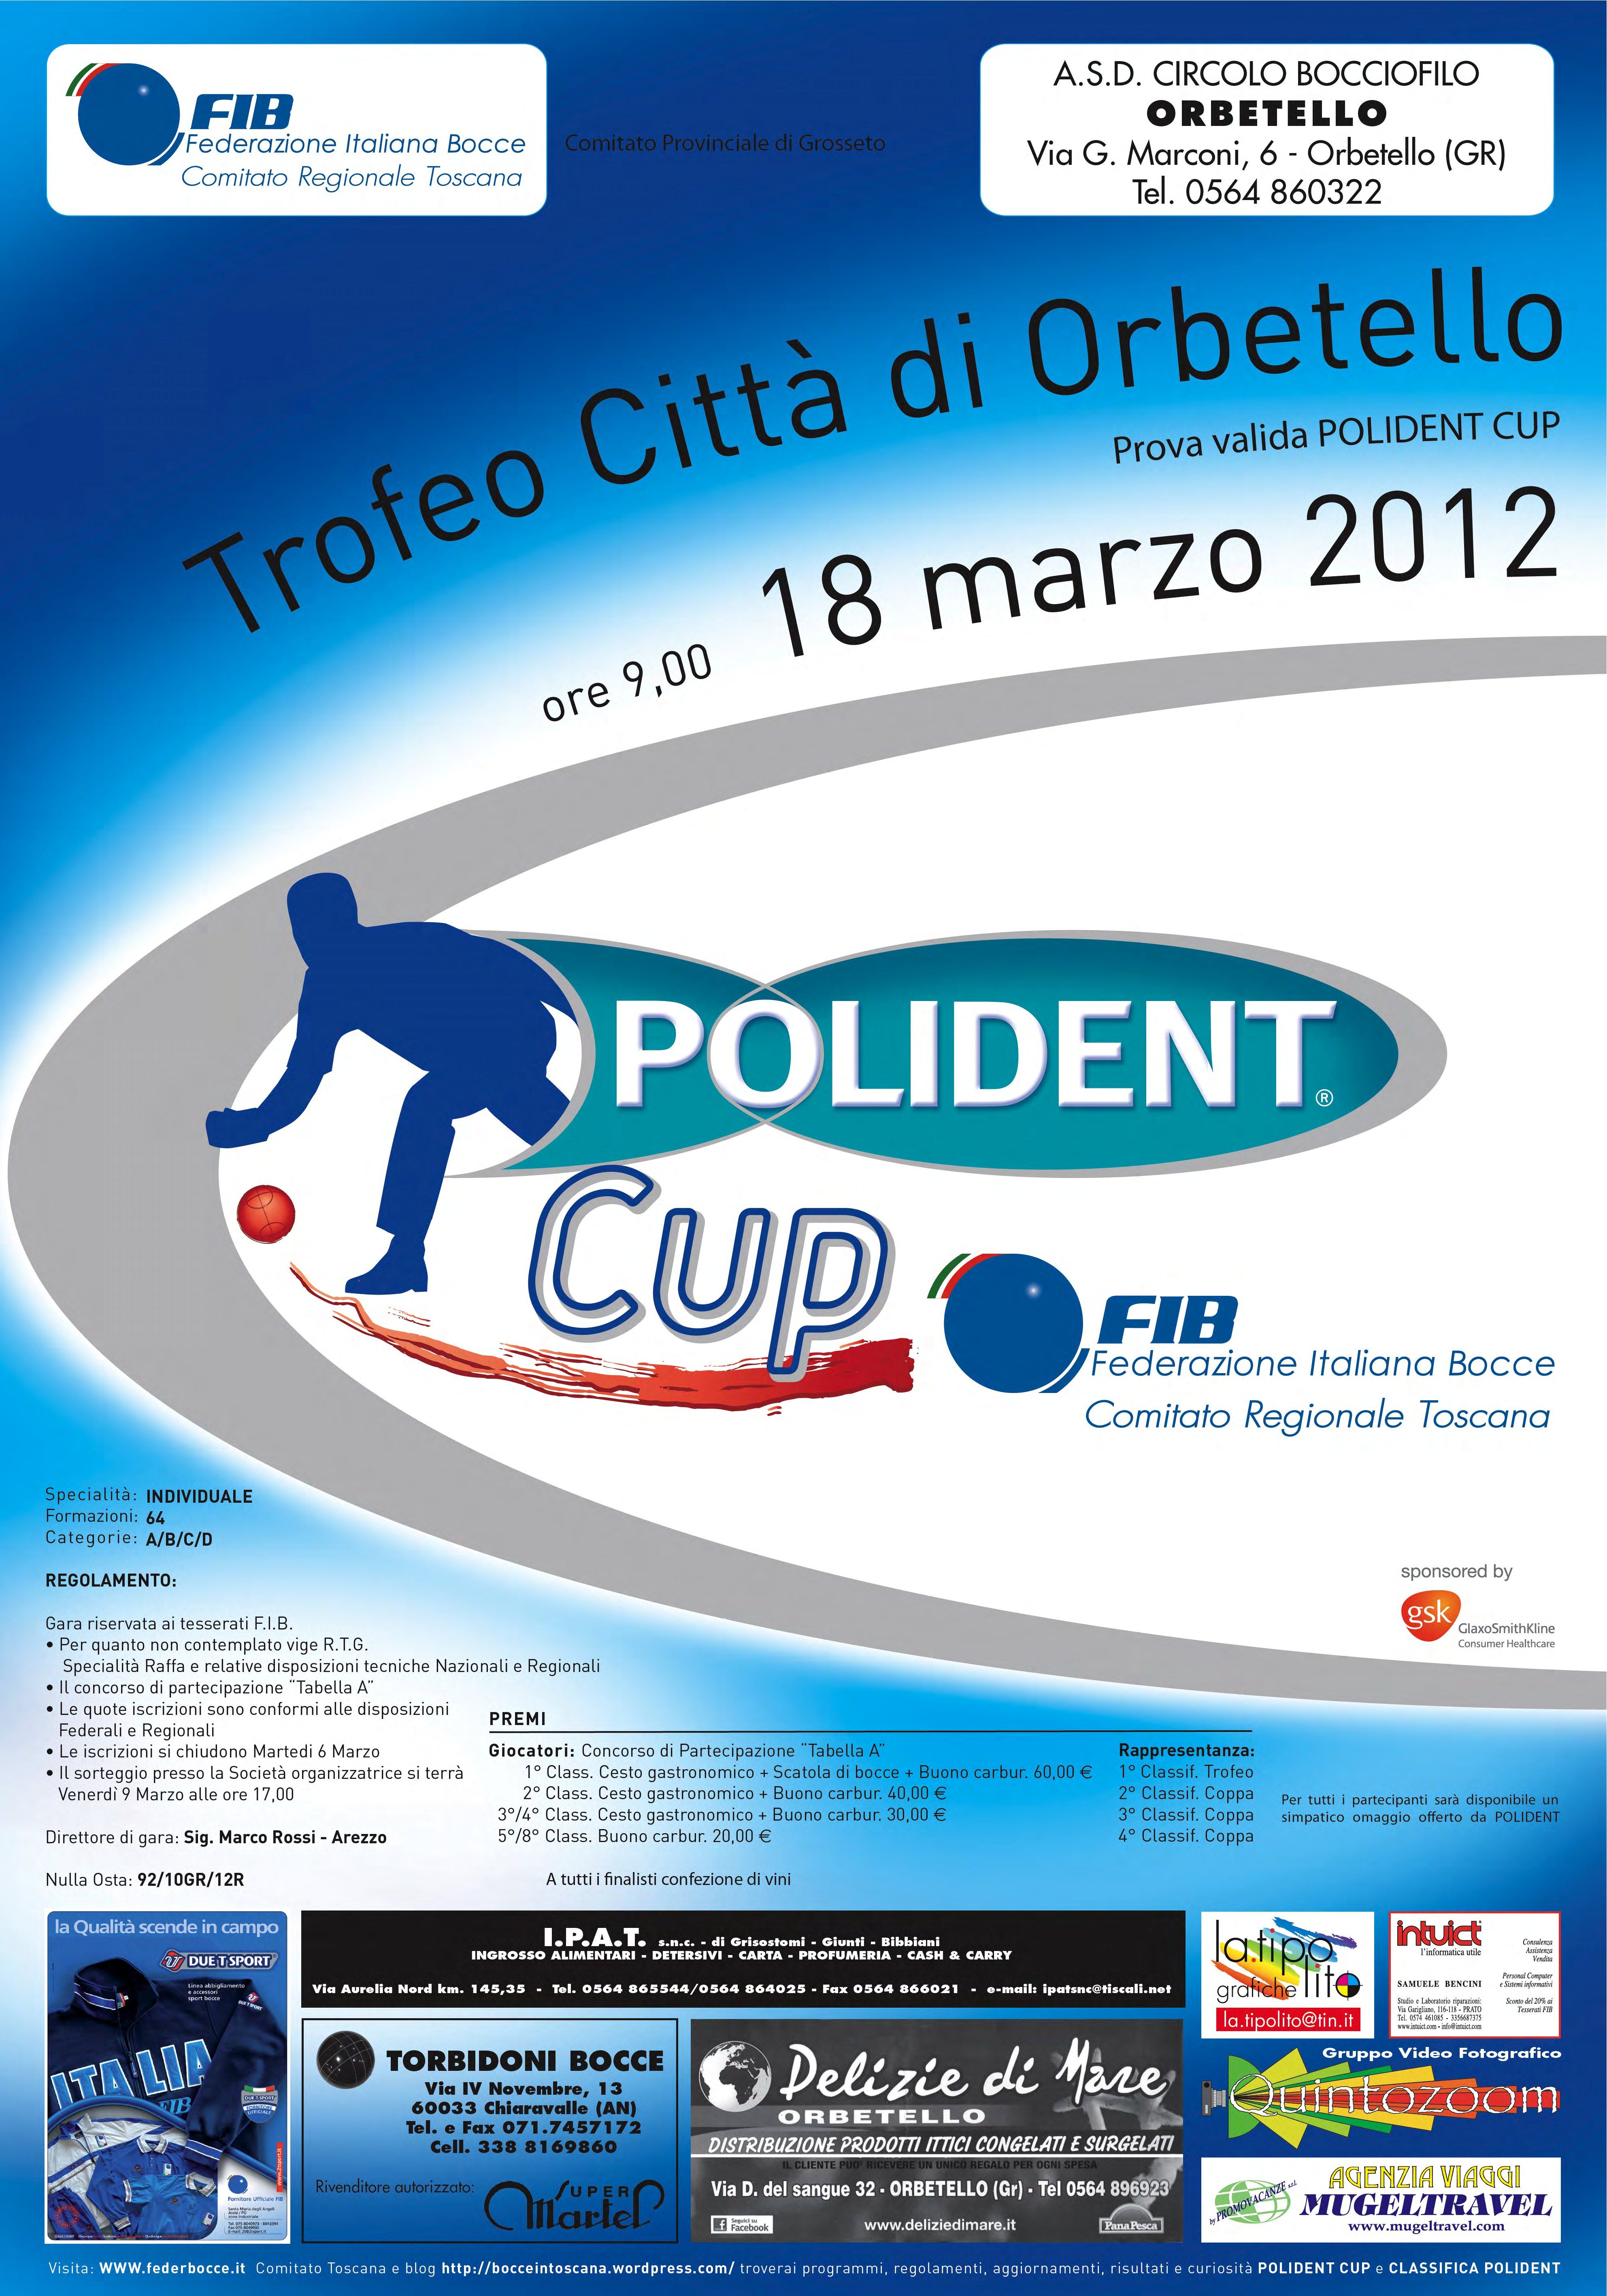 Polident Cup